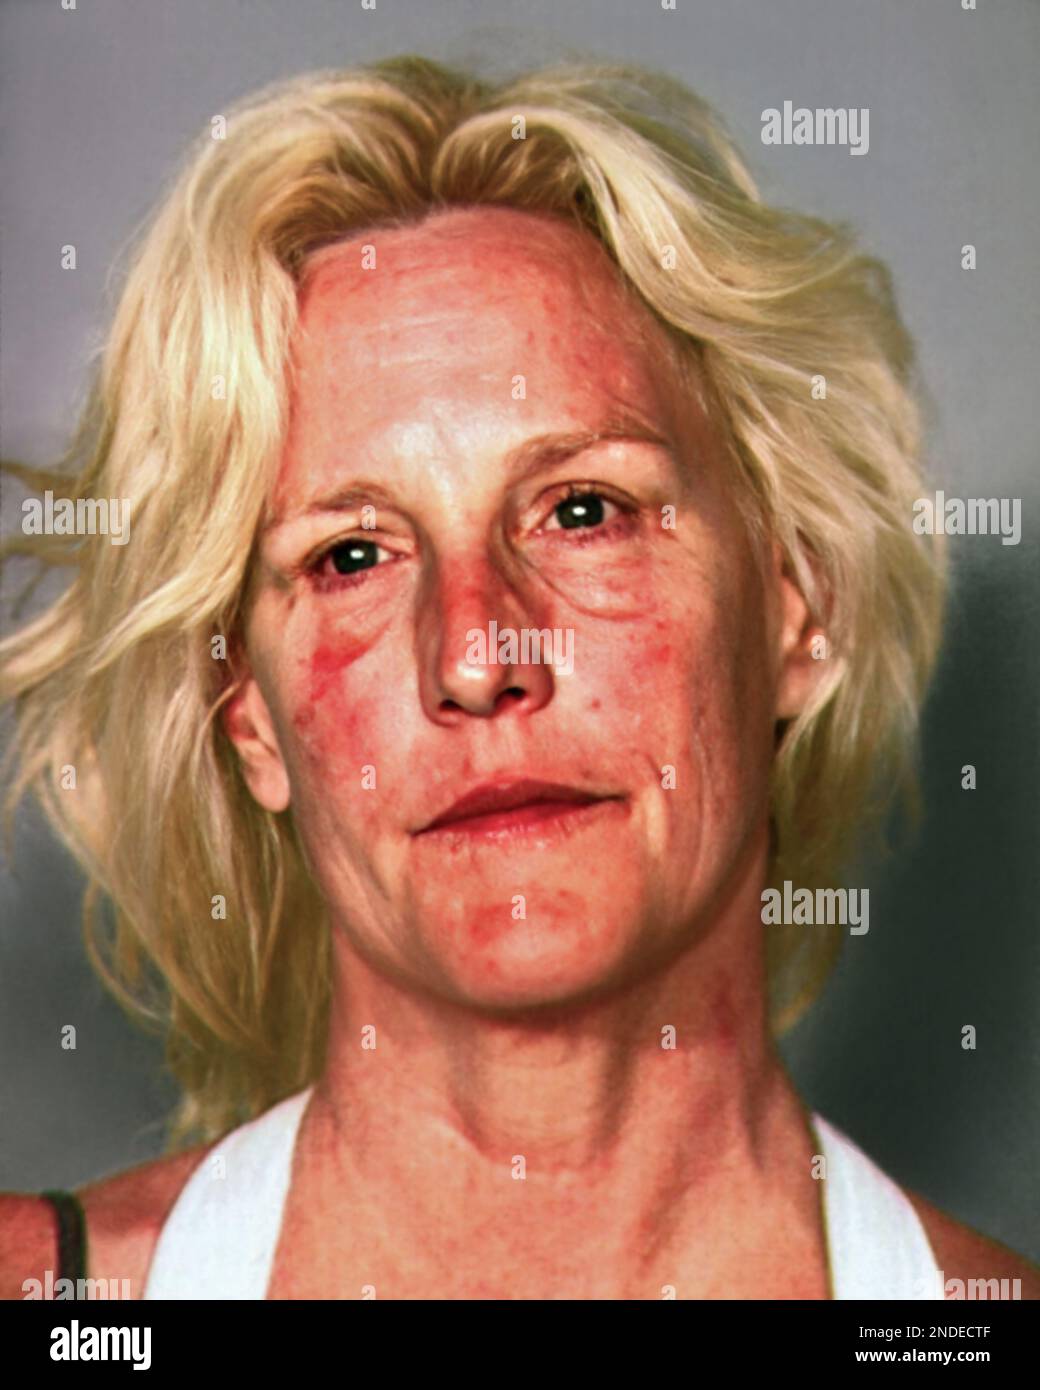 2013 , 7 june , NEVADA , USA : The famous american ERIN BROCKOVICH ( née Pattee , born June 22, 1960 ), in the mug-shot by Police Clark County Nevada Detention Center , arrested on June 7 , 2013, on suspicion of boating while intoxicated.  .  Brockovich is a legal clerk , whistleblower , consumer advocate  and environmental activist who was instrumental in building a case against Pacific Gas & Electric Company ( PG&E ) involving groundwater contamination in Hinkley, California with the help of attorney Ed Masry in 1993 . Their successful lawsuit was the subject of the Oscar-winning film, ' Eri Stock Photo